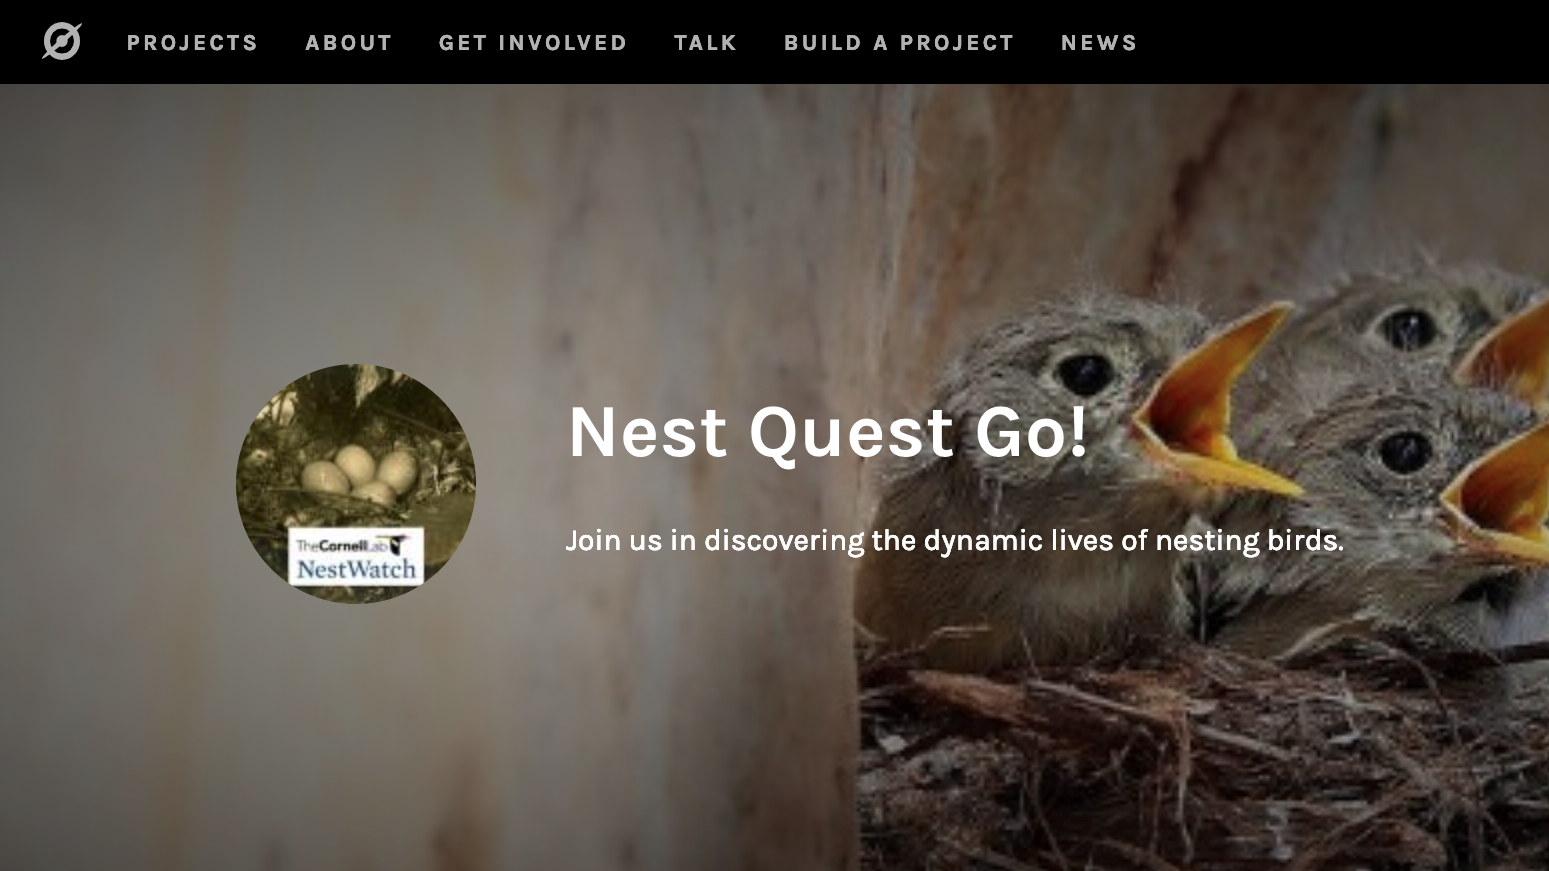 A screenshot of the Nest Quest Go! page on Zooniverse. The Zooniverse header navigation is at the top. There is a photo of three nestlings (baby birds) with their beaks open with text Nest Quest Go! Join us in discovering the dynamic lives of nesting birds overlayed. There is also a circle logo for the project that has the text The Cornell Lab NestWatch